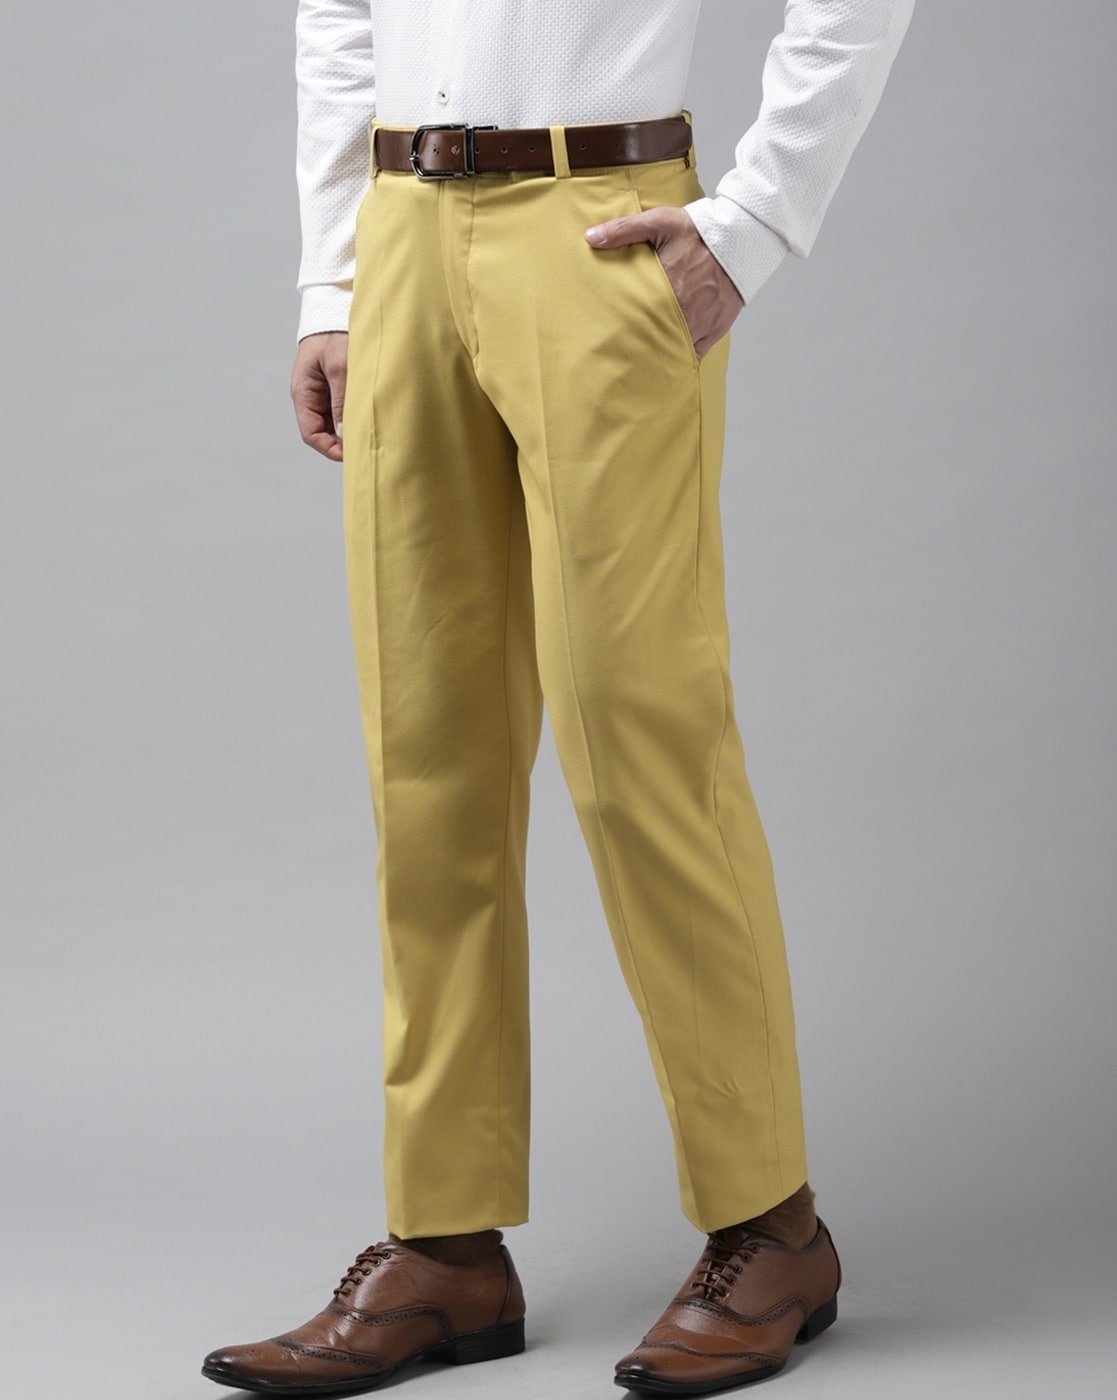 Buy Rr Blue Slim Fit Flat Front Trousers  Yellow Color Men  AJIO LUXE